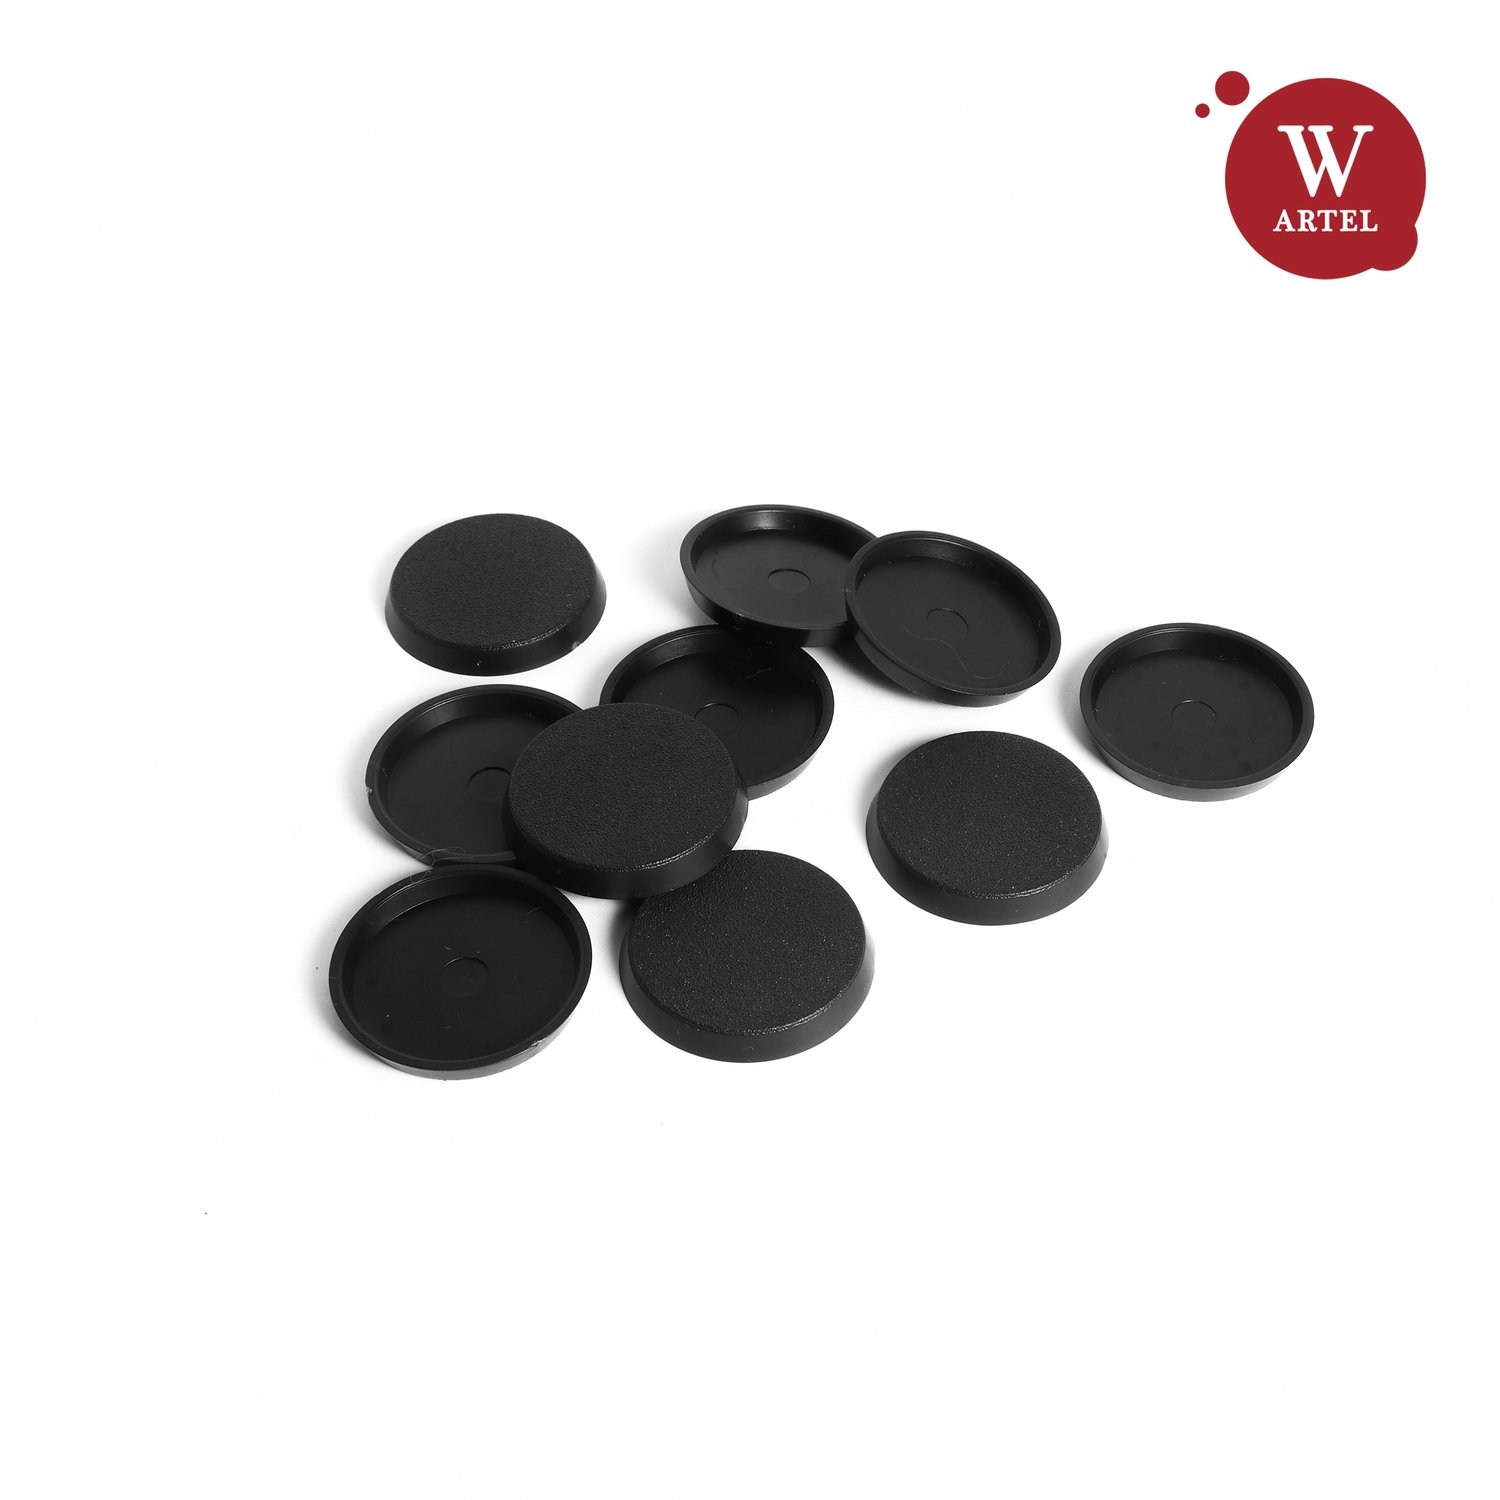 10x32mm round bases for miniatures